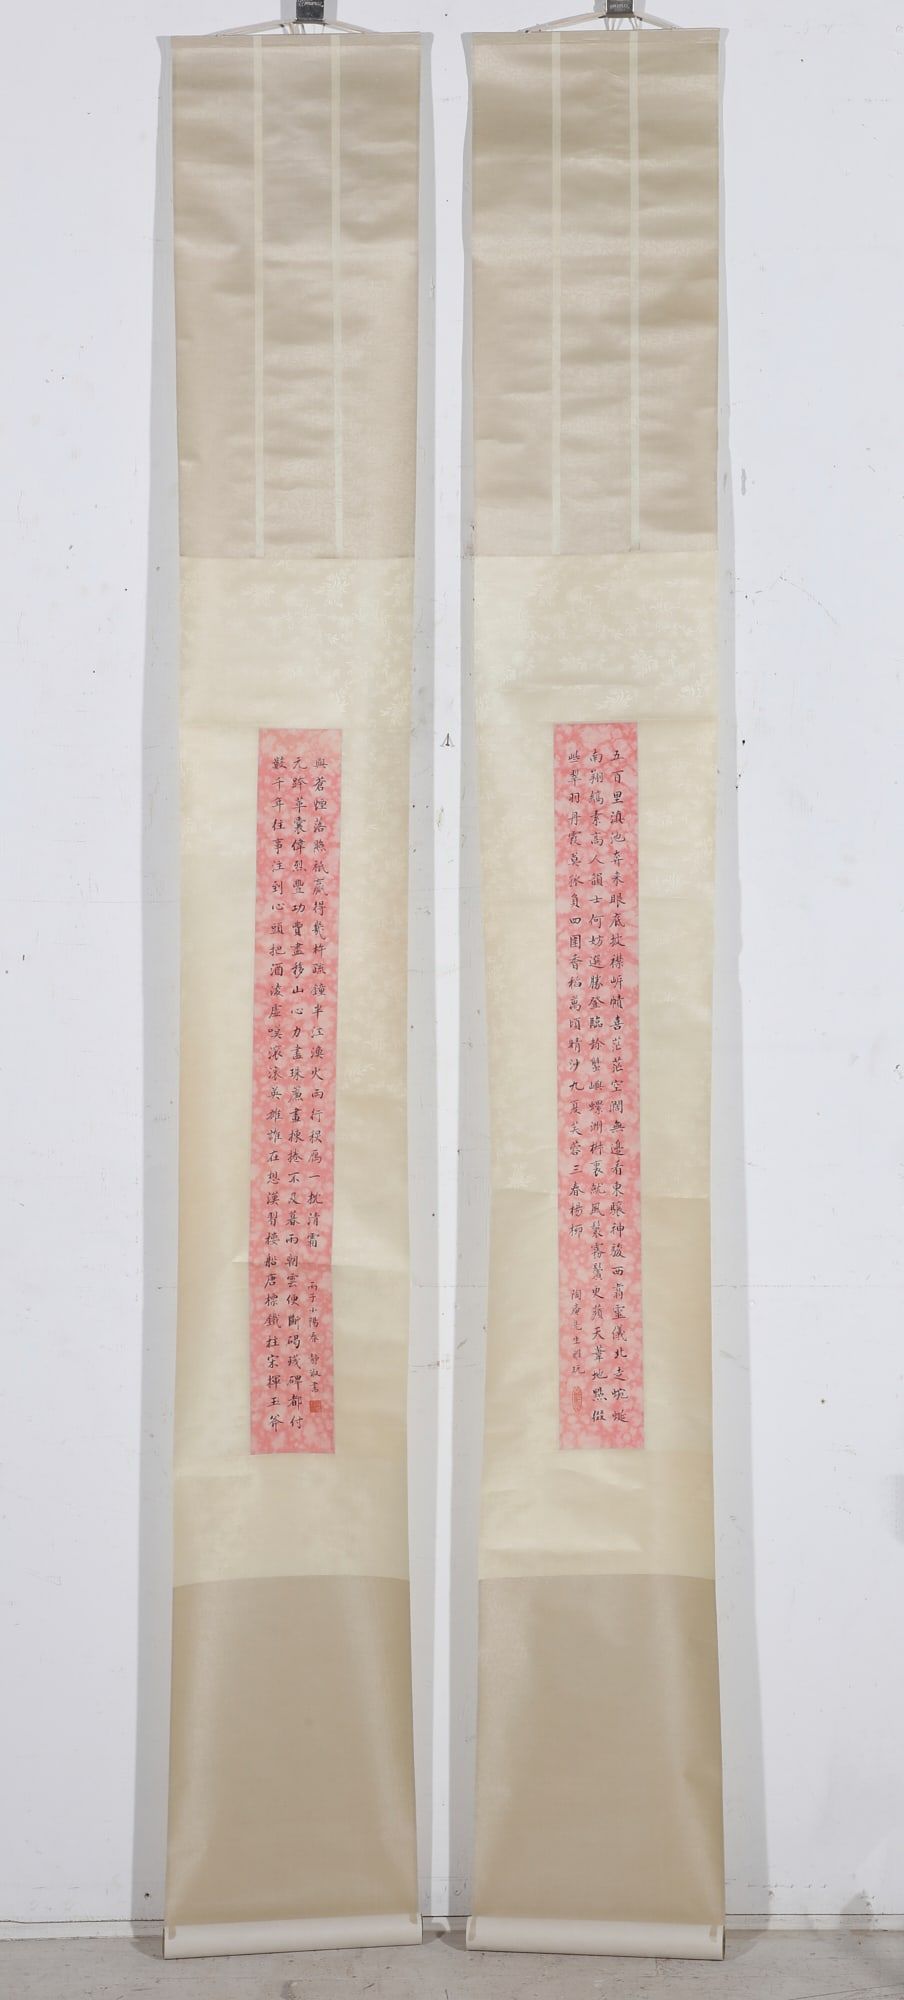 A PAIR OF CHINESE CALLIGRAPHY SCROLLS 2fb33ee